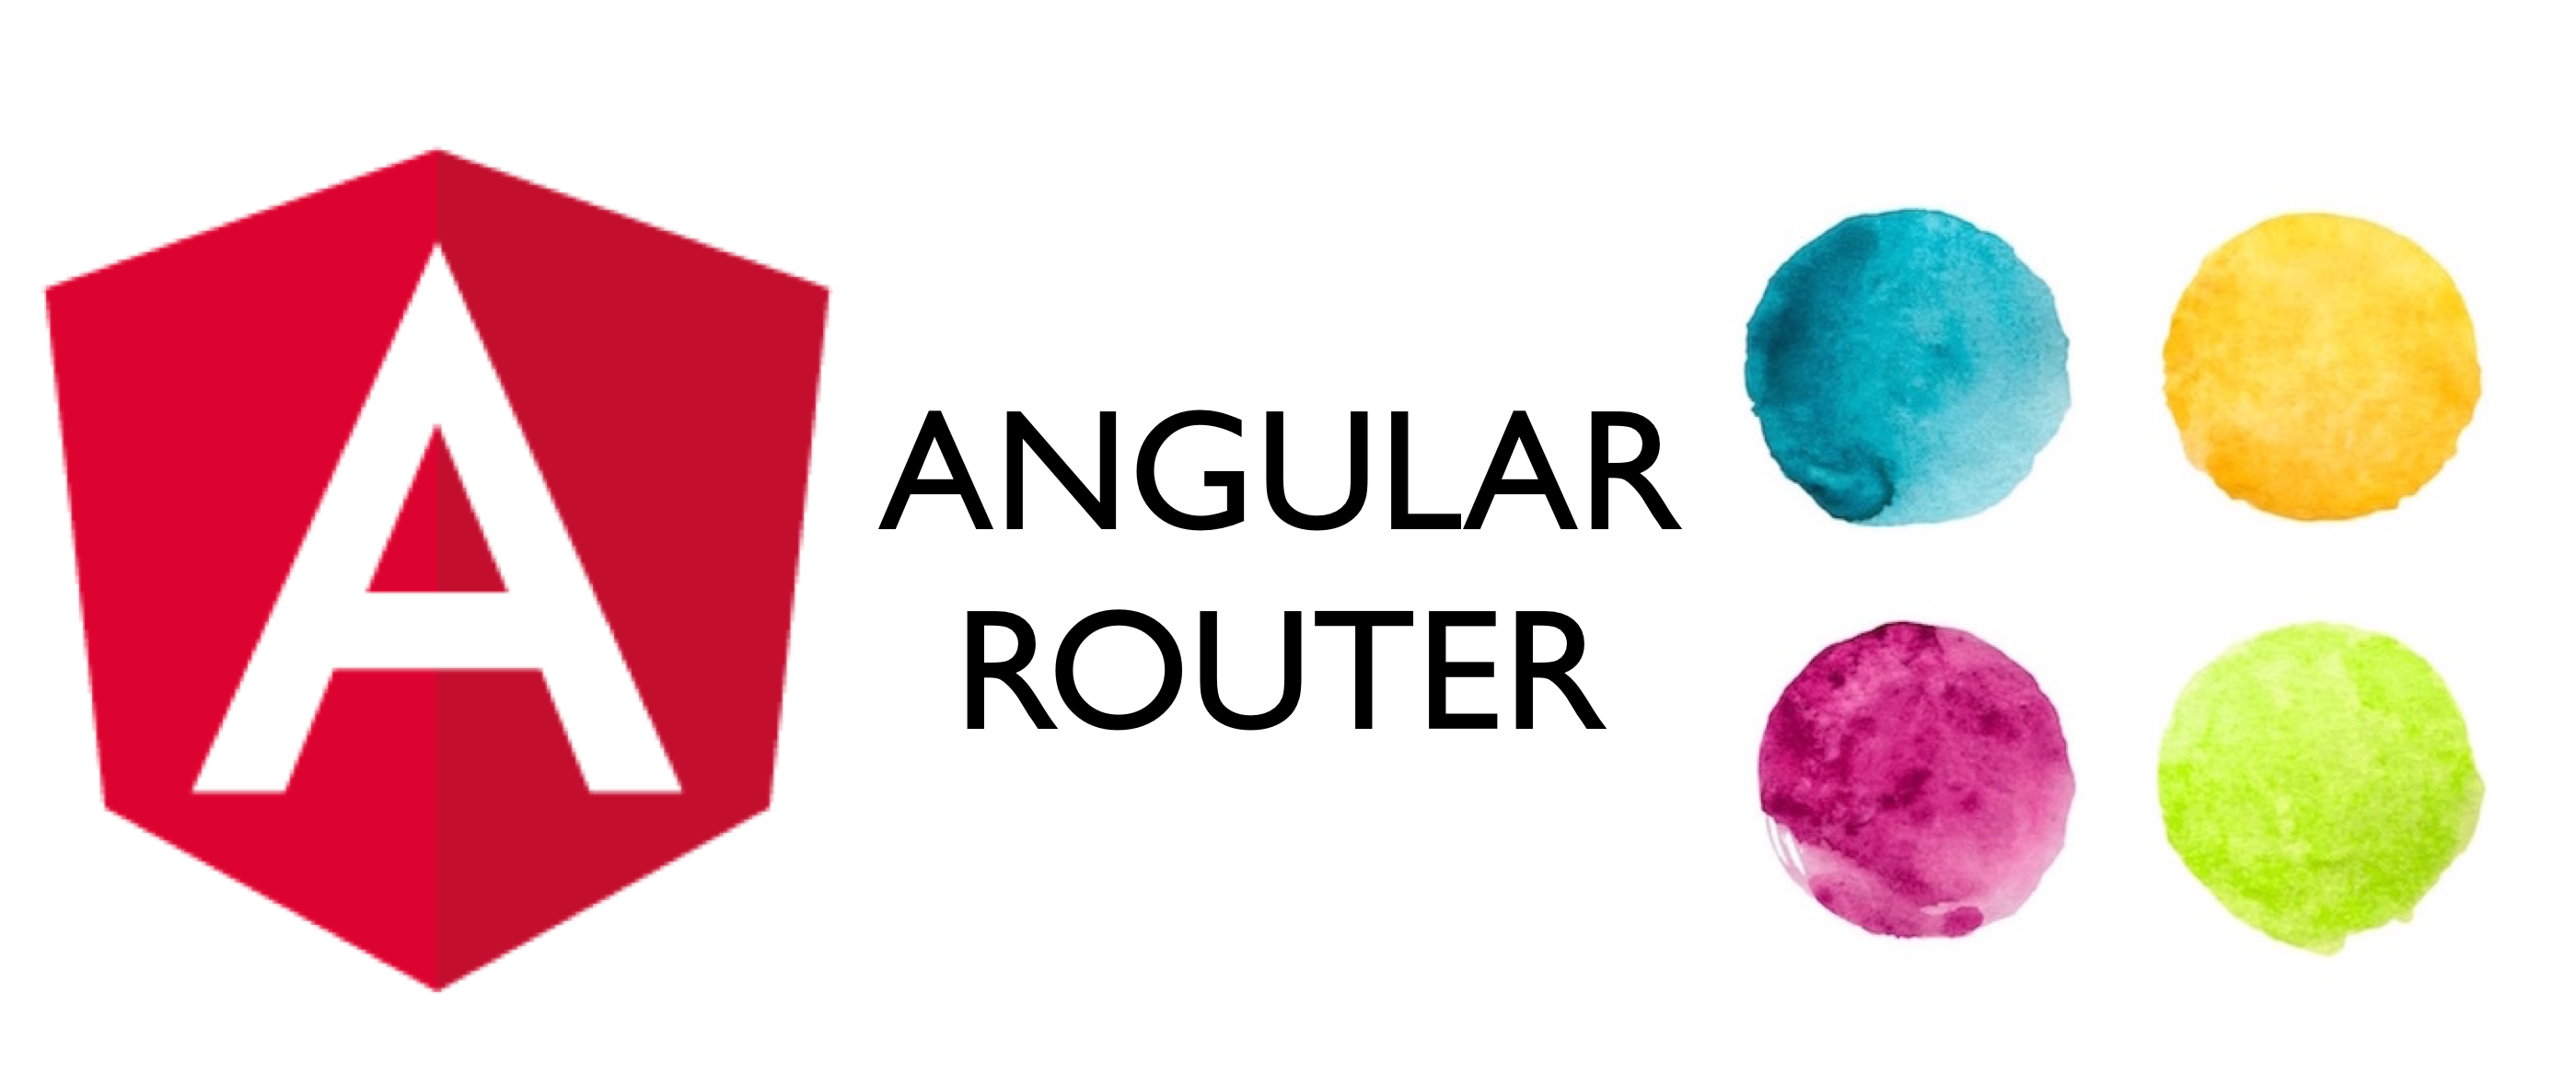 Introduction to Angular Router